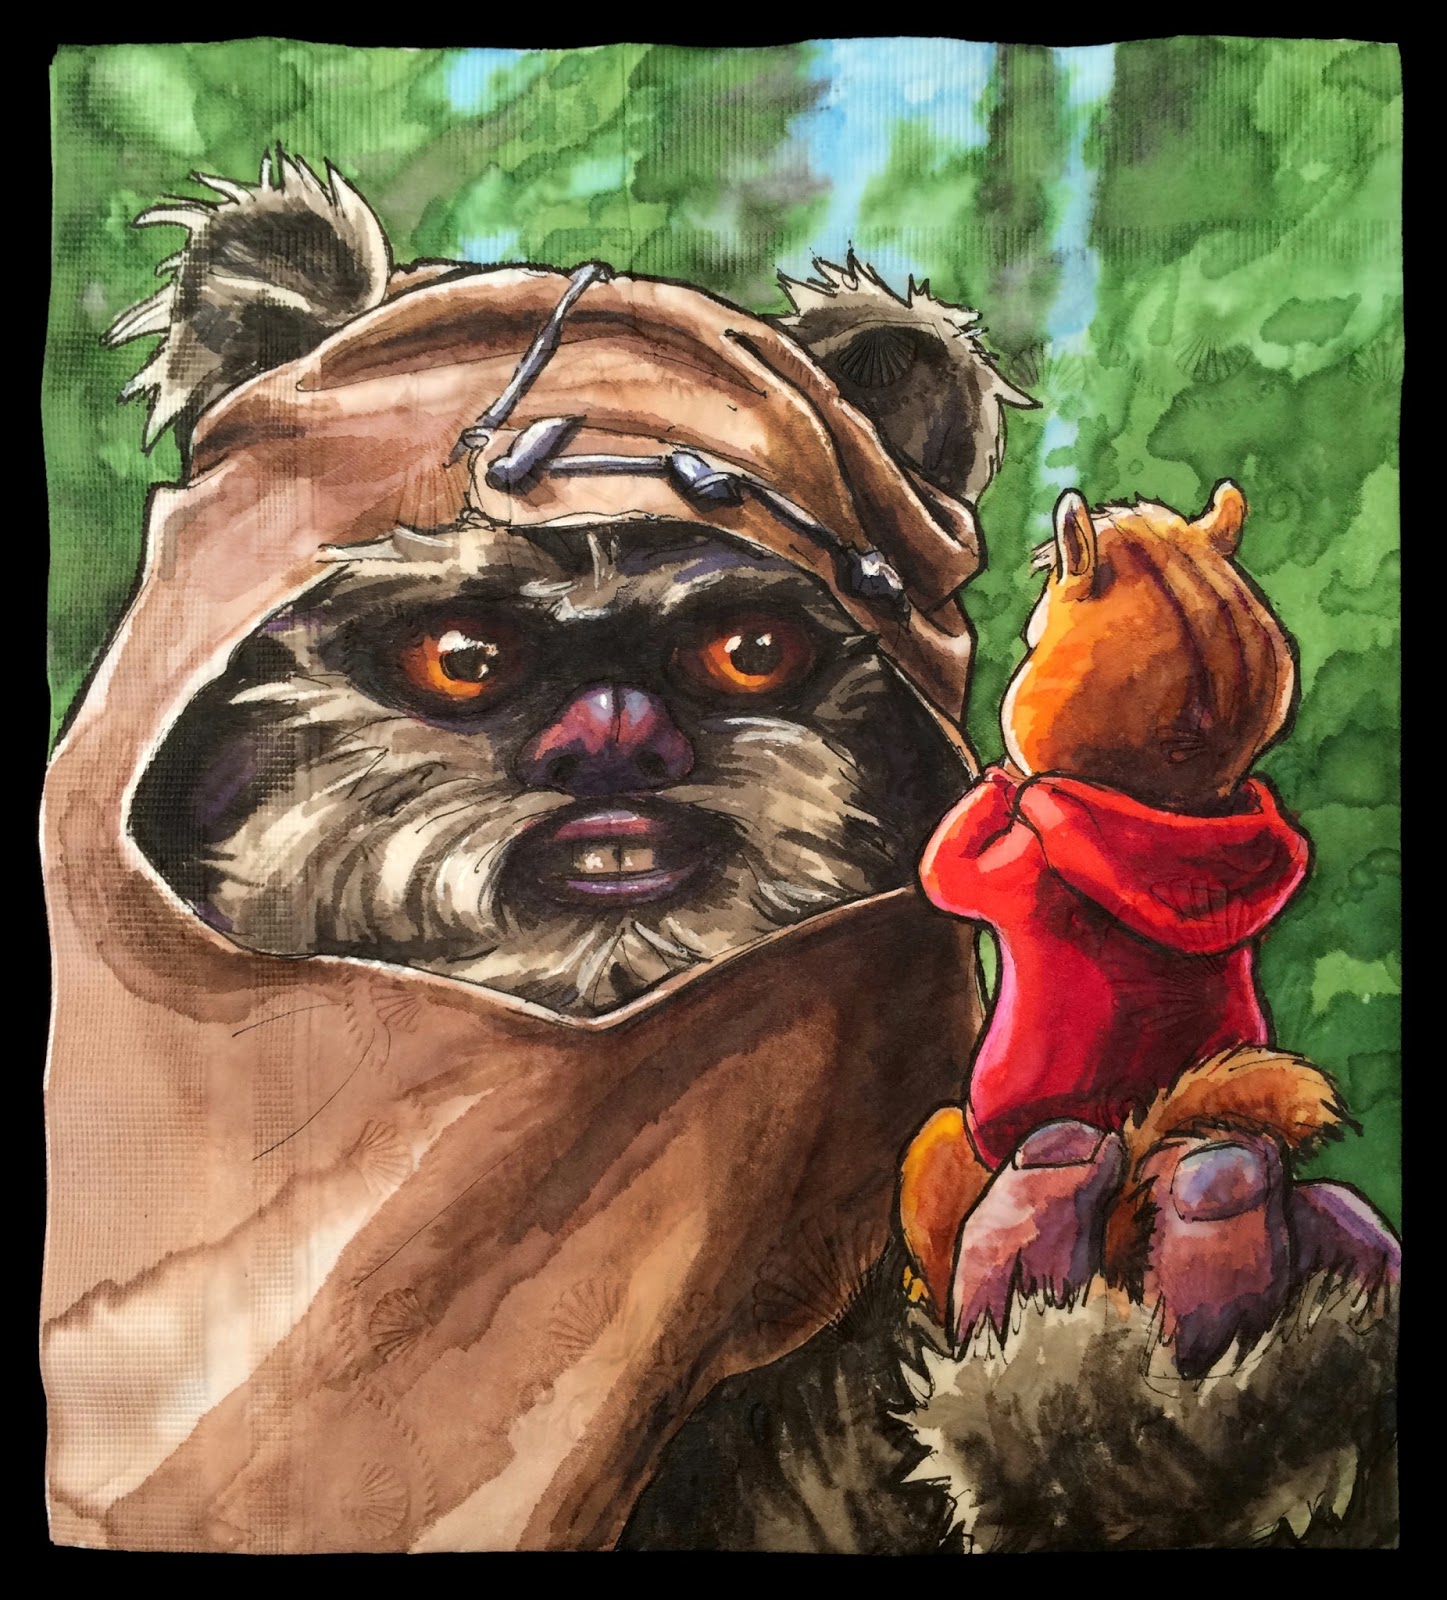 Wicket the Ewok and Alvin the Chipmunk.